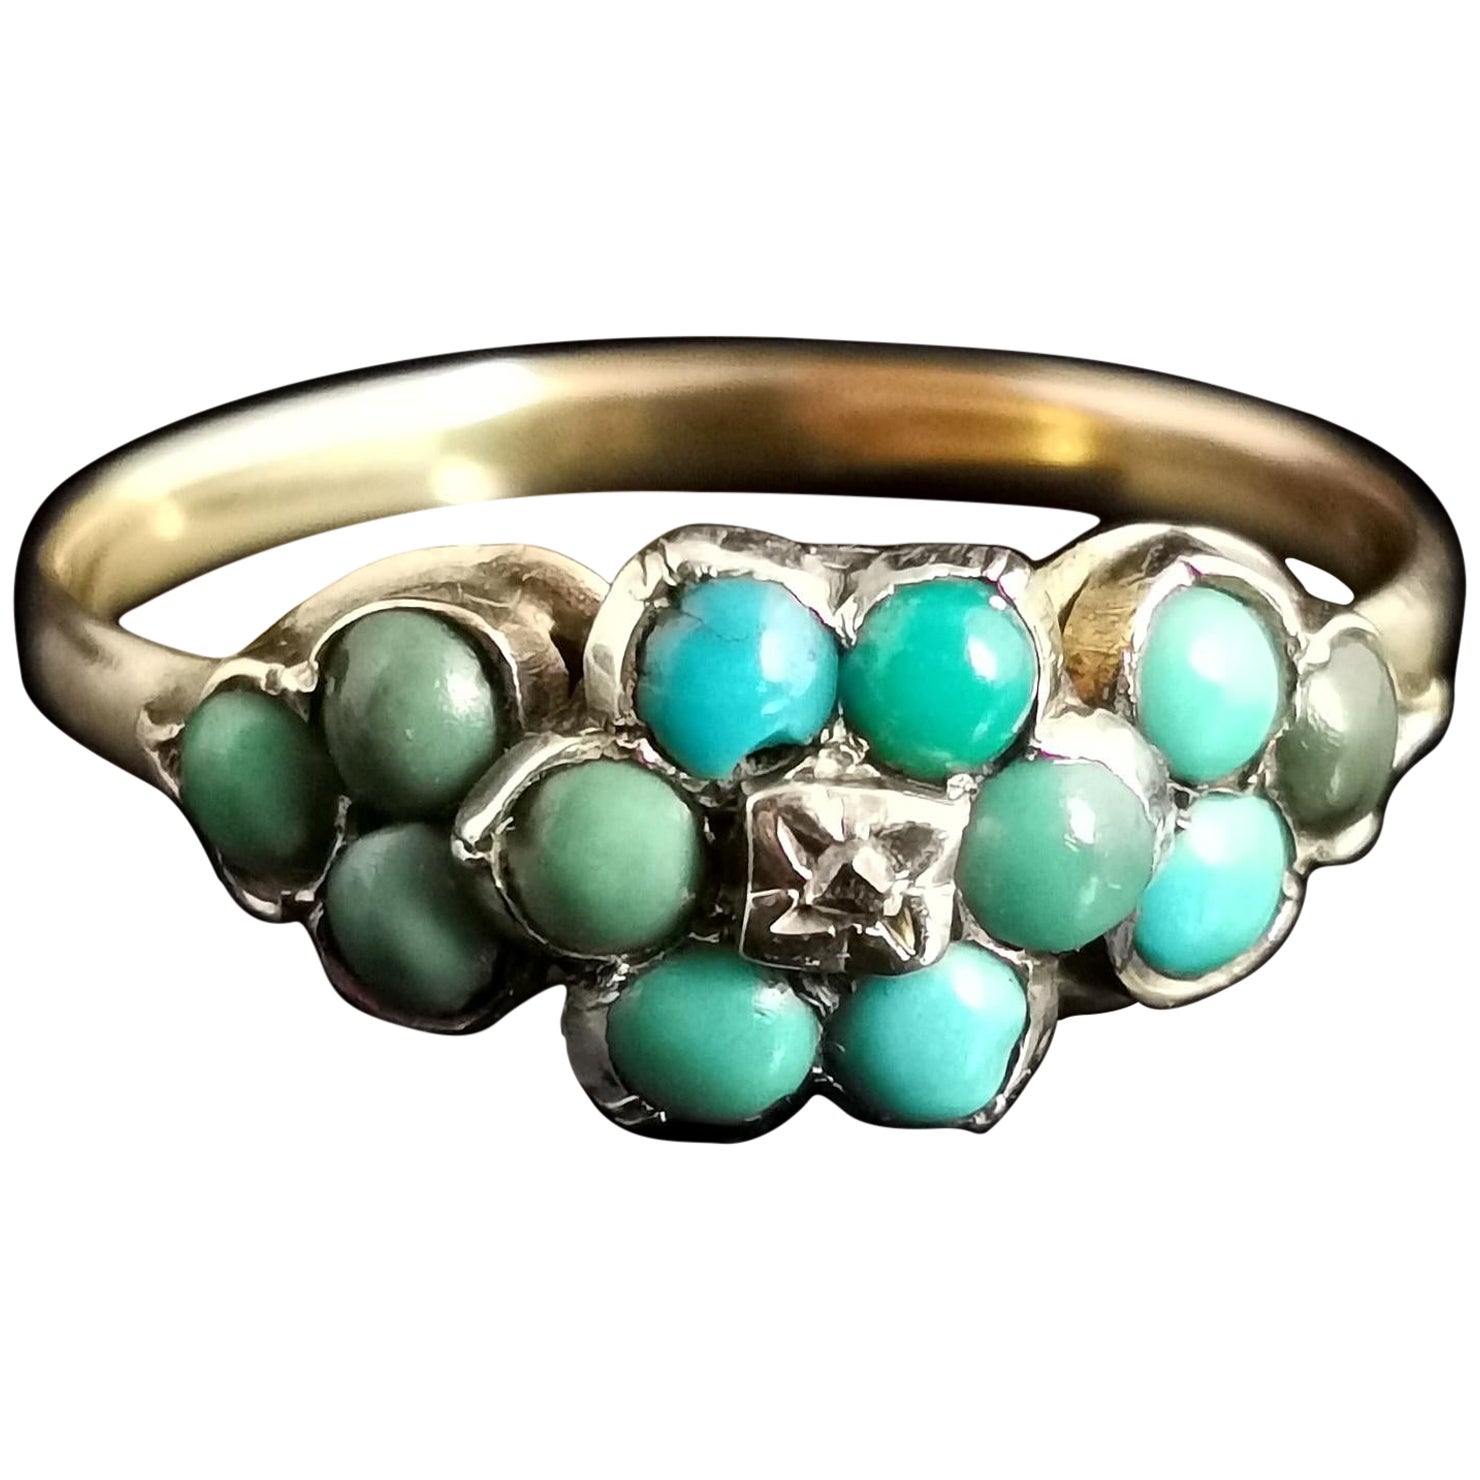 Antique Victorian Turquoise and Diamond Cluster Ring, 18kt Gold, Forget Me Not